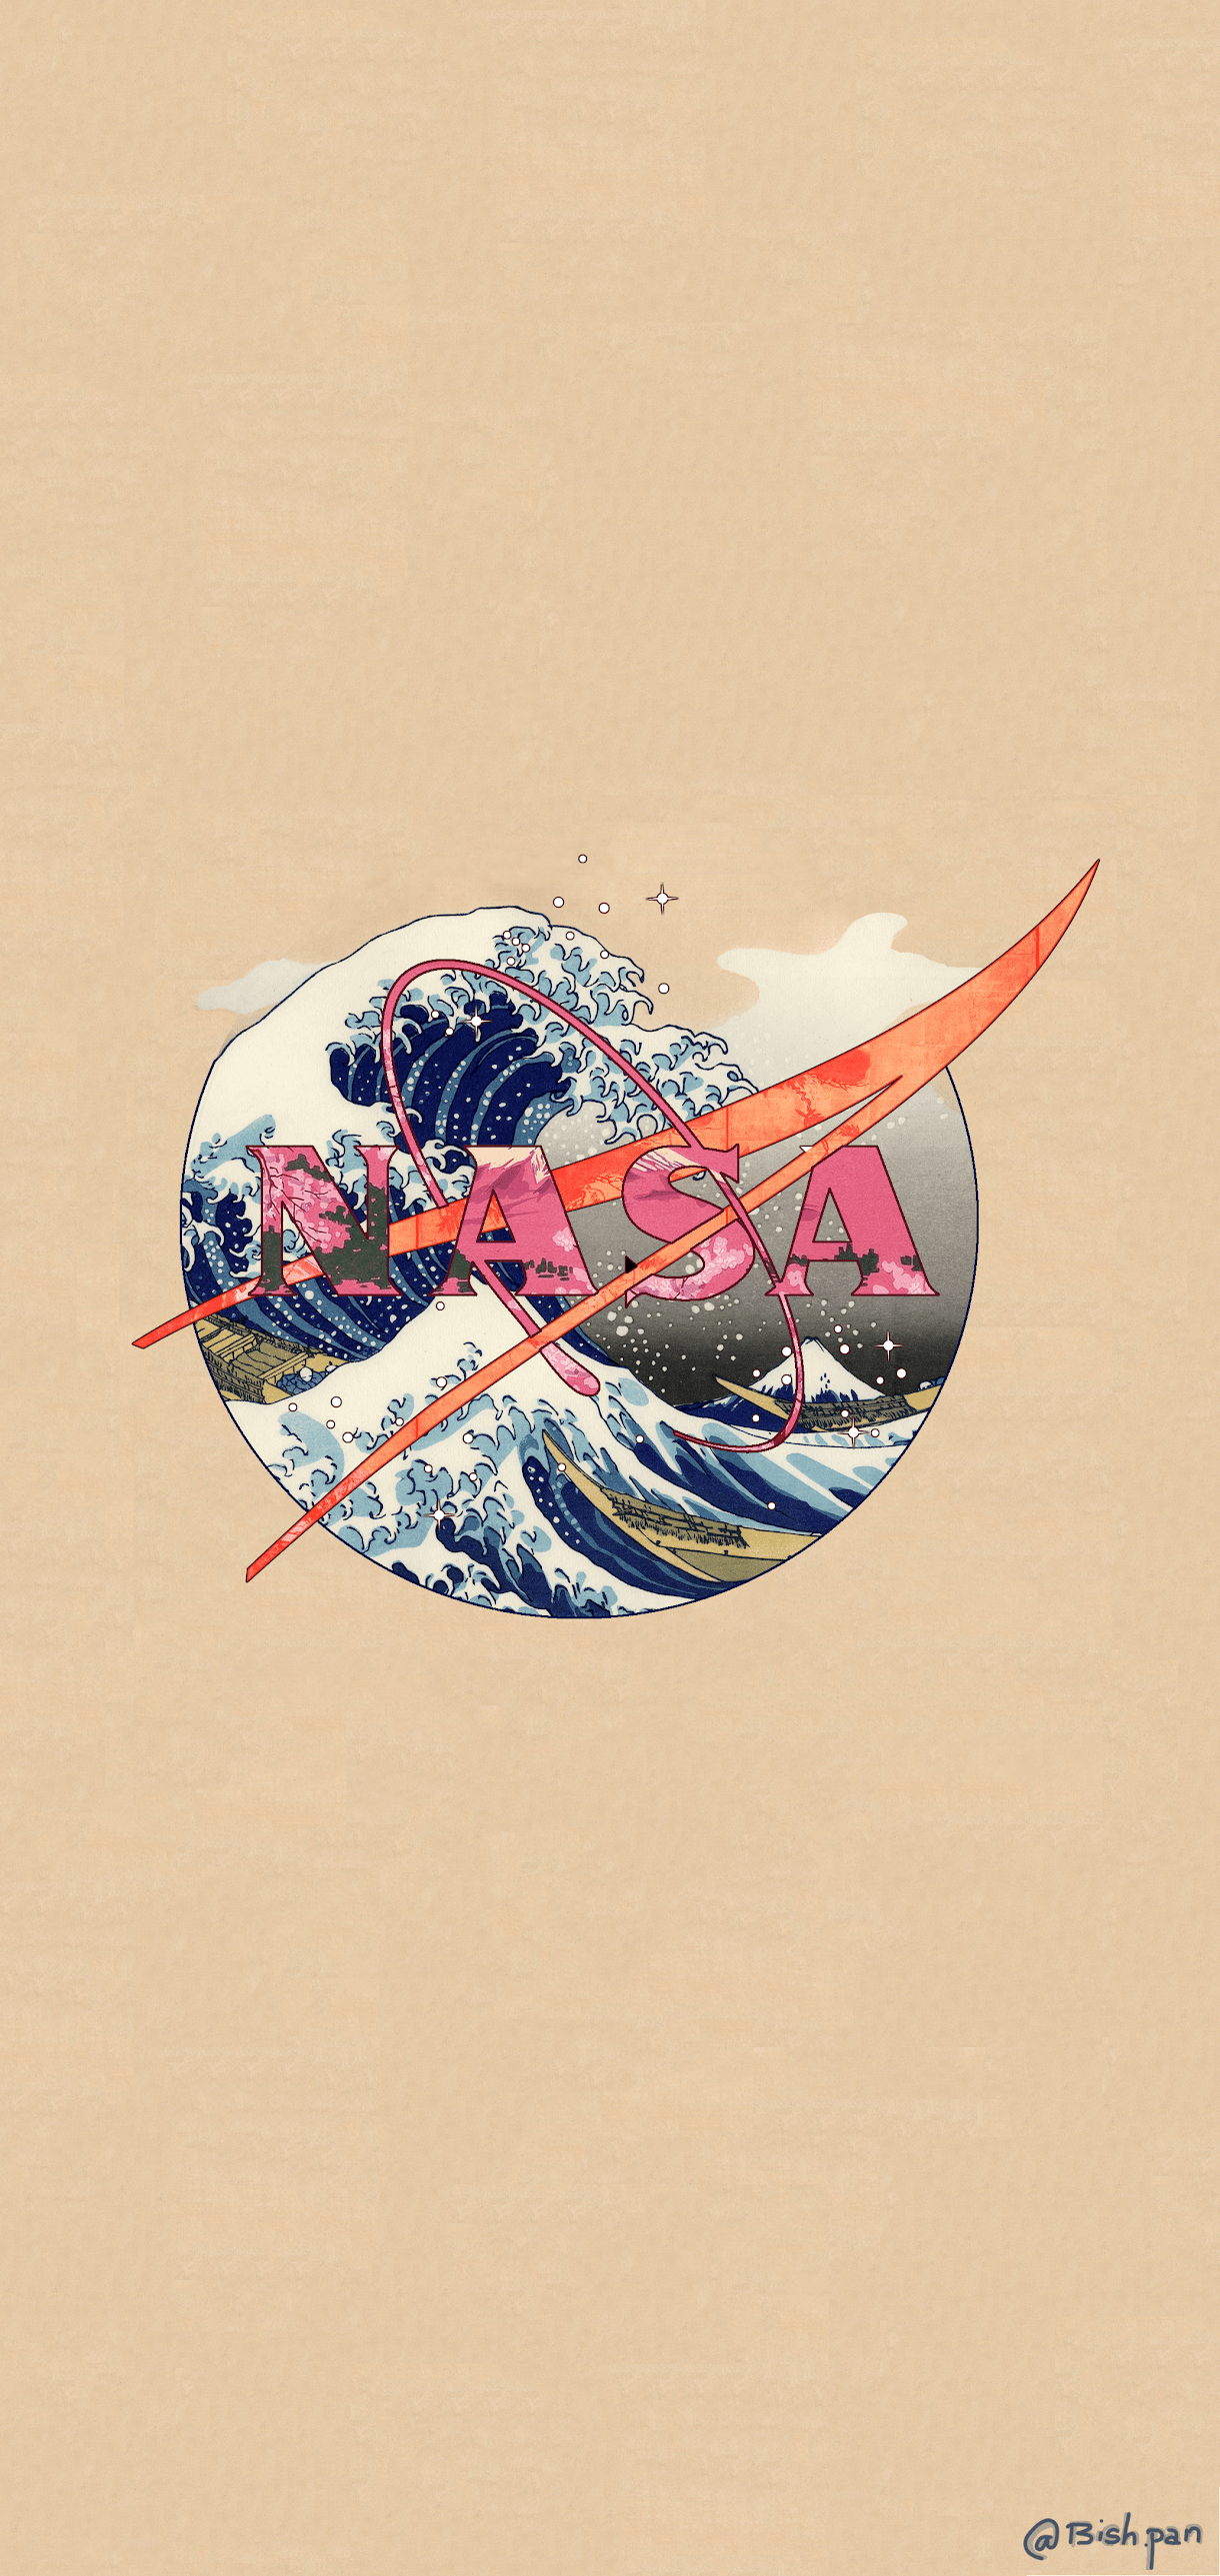 Nasa and The Great Wave aesthetic wallpaper iphone